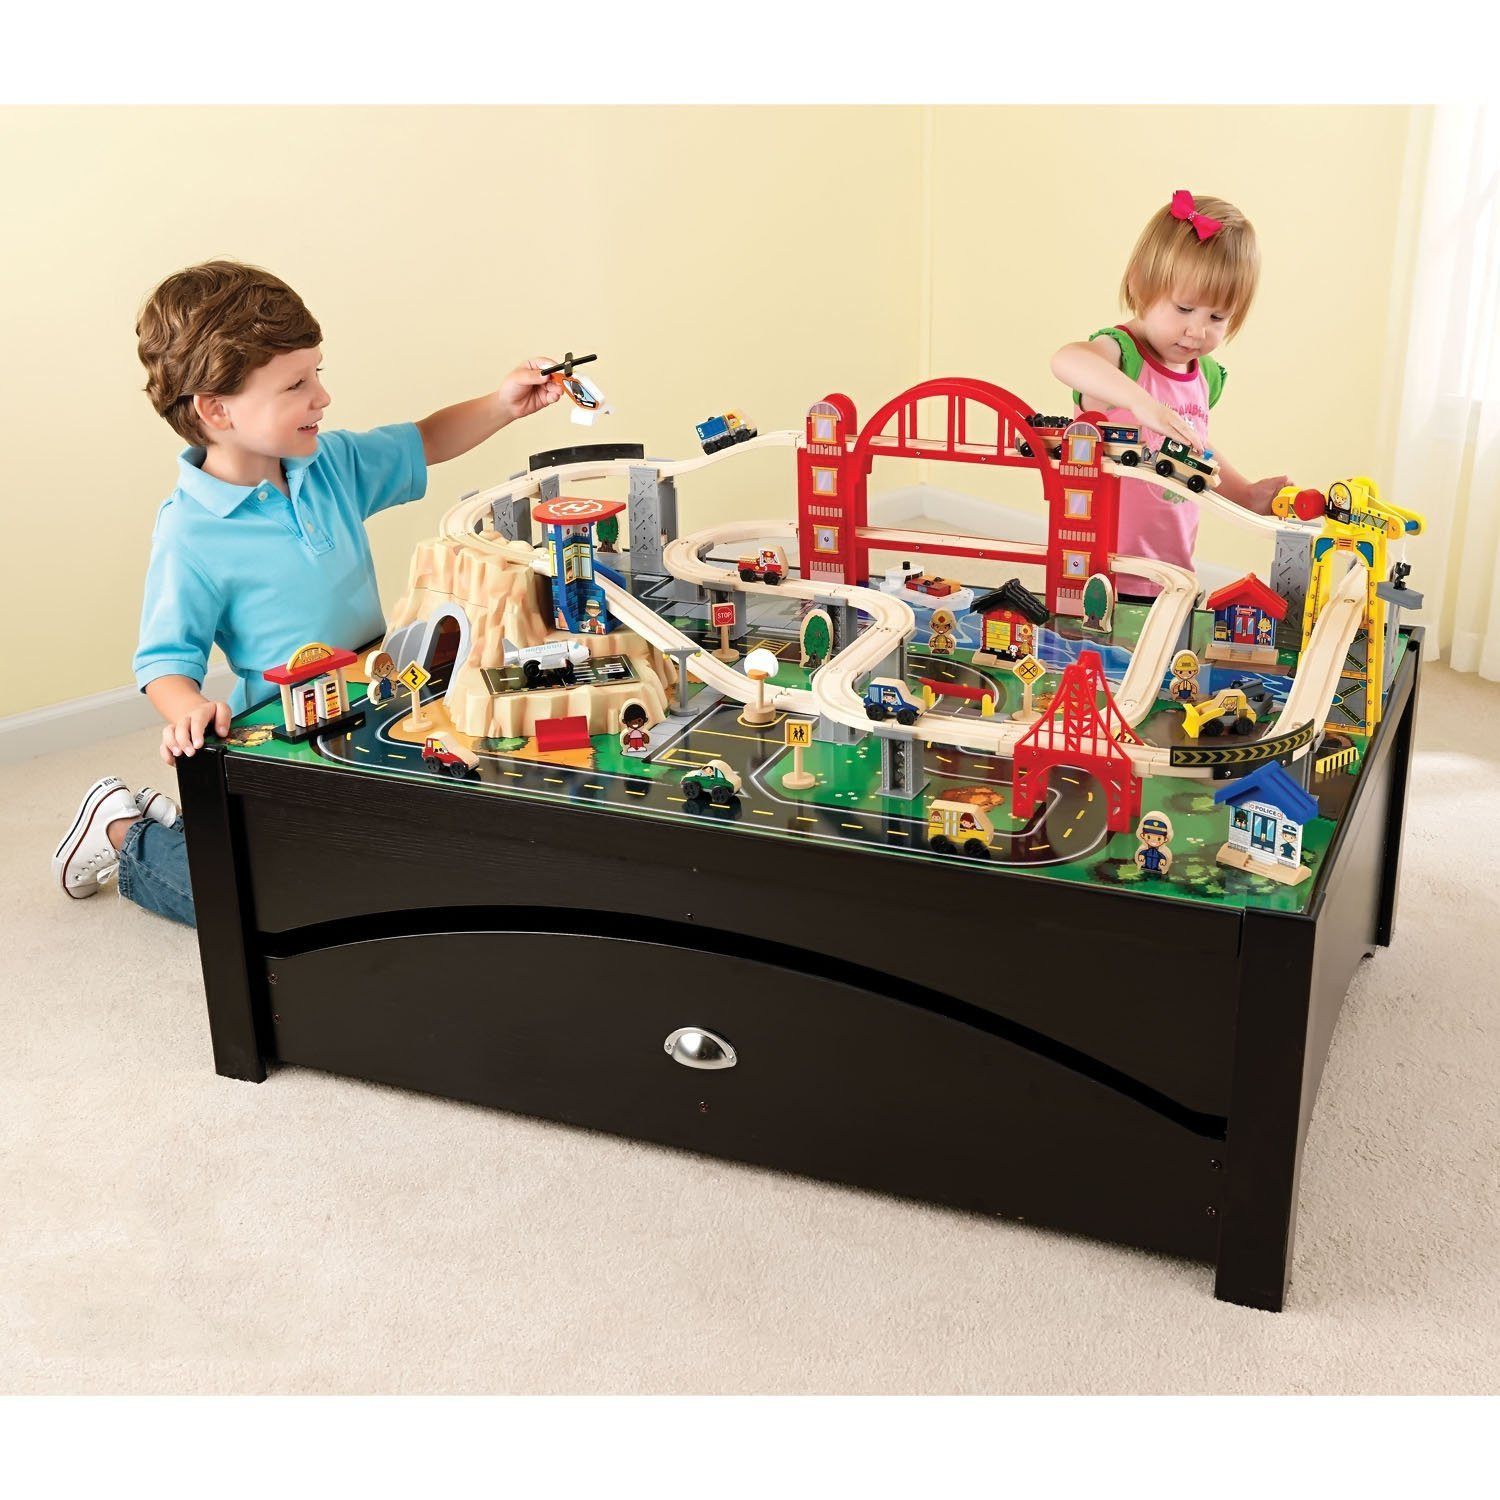 Kids Train Table
 The Best Train Table For Kids Less Mess Happy Moms